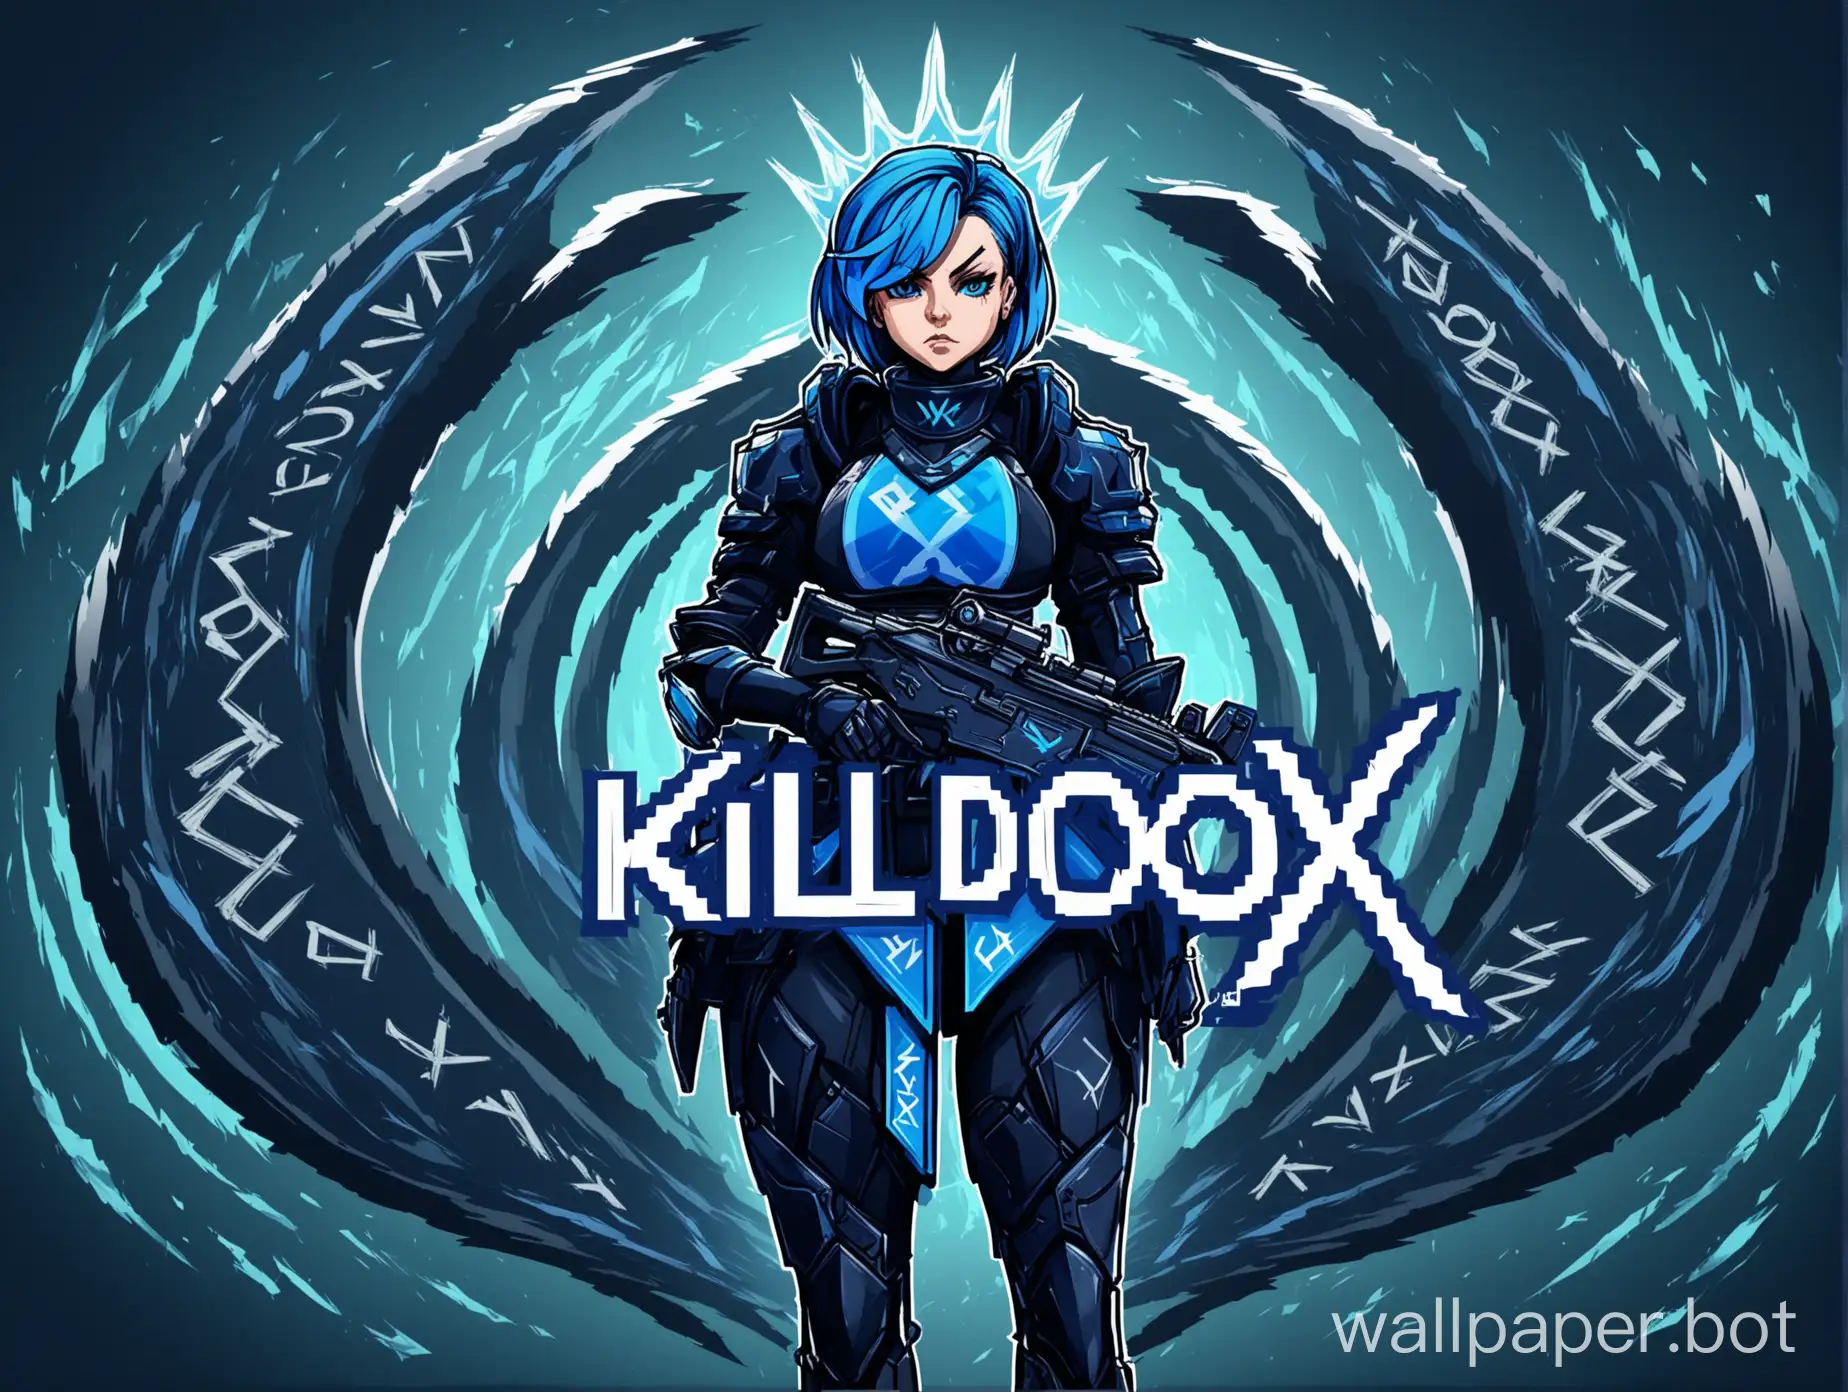 In the middle of the curves, the nickname kill.dox is written in large letters. With Zadie, a character from the game Valorant Reina. The colors are blue and black